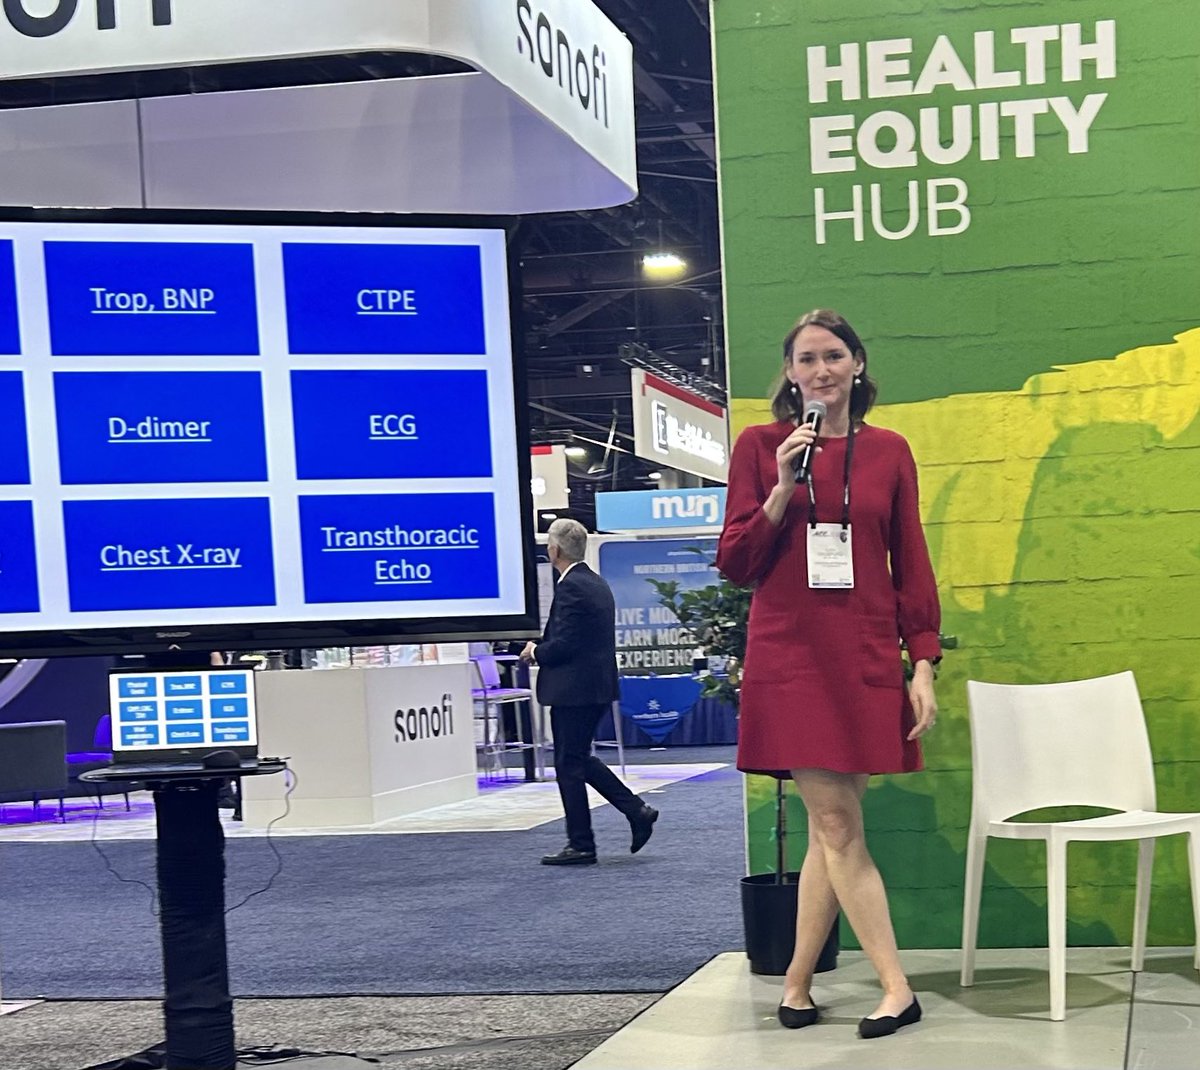 Come check out @AHauspurg at the Health Equity Hub at #ACC24 speaking on “Maternal Health Equity: Are We Breaking Through or Breaking Down?”@MageeWomens